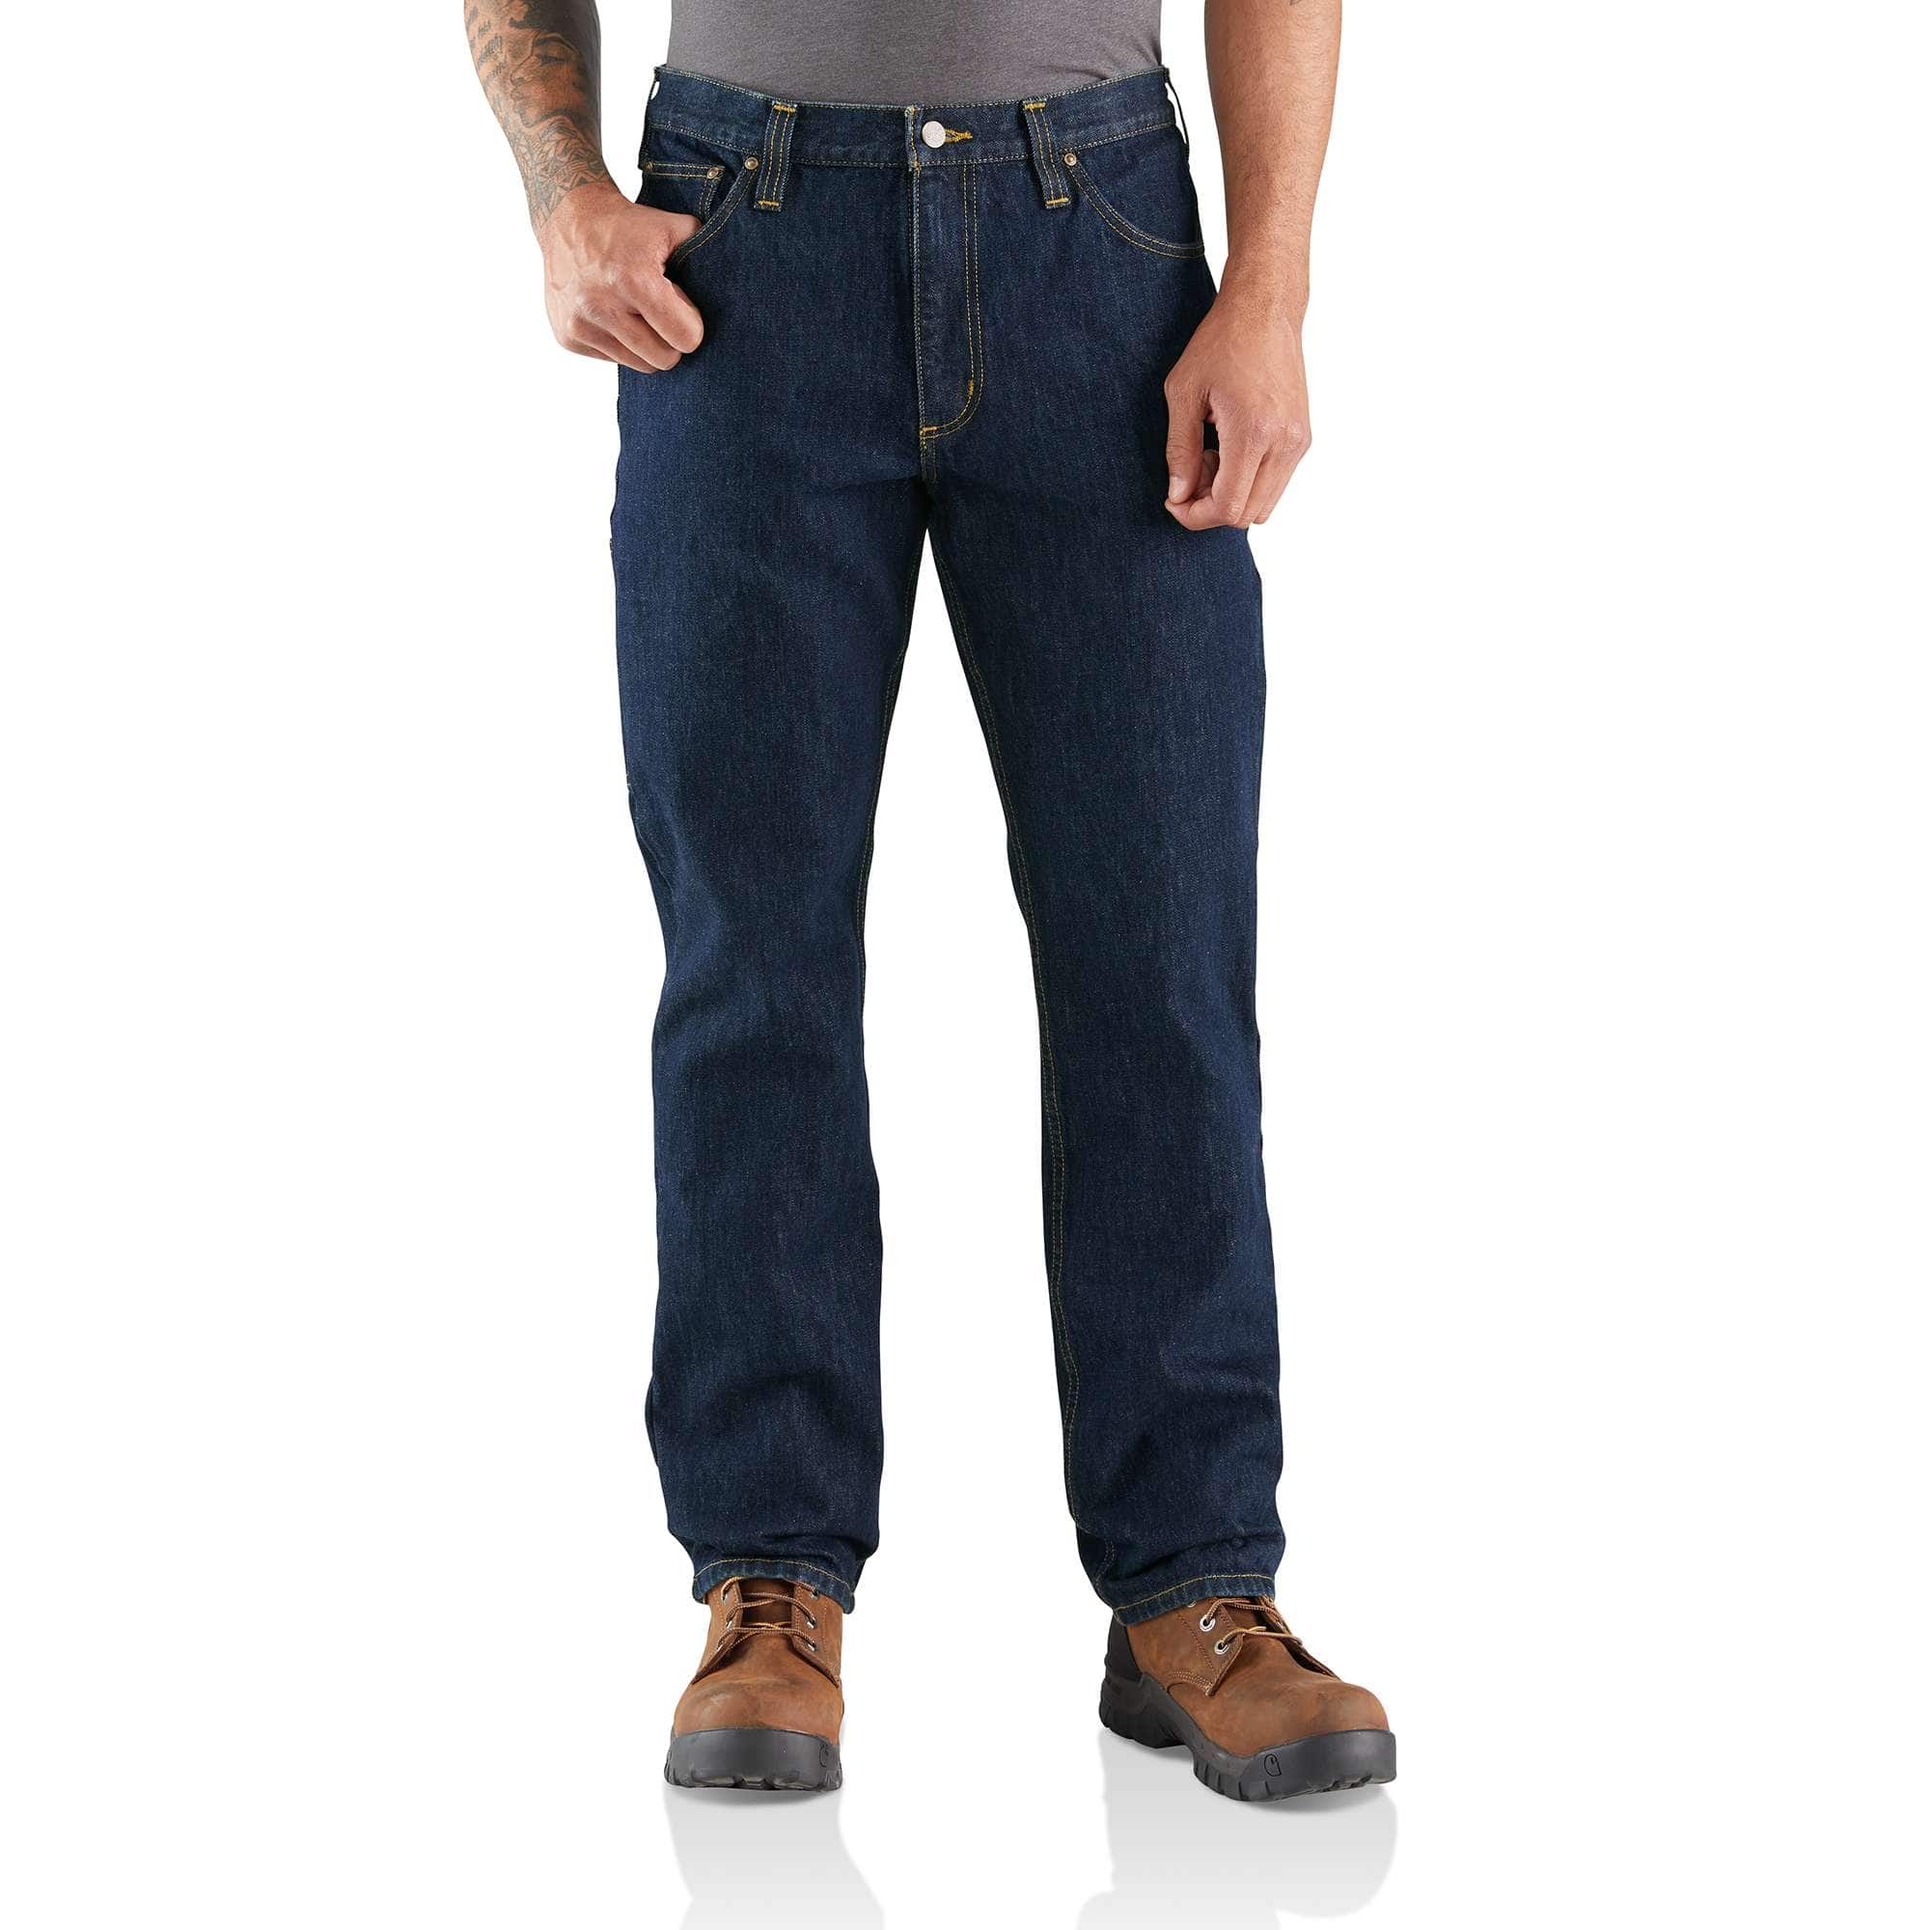 Carhartt mens Relaxed Fit Tapered Leg Jean (Regular and Big and